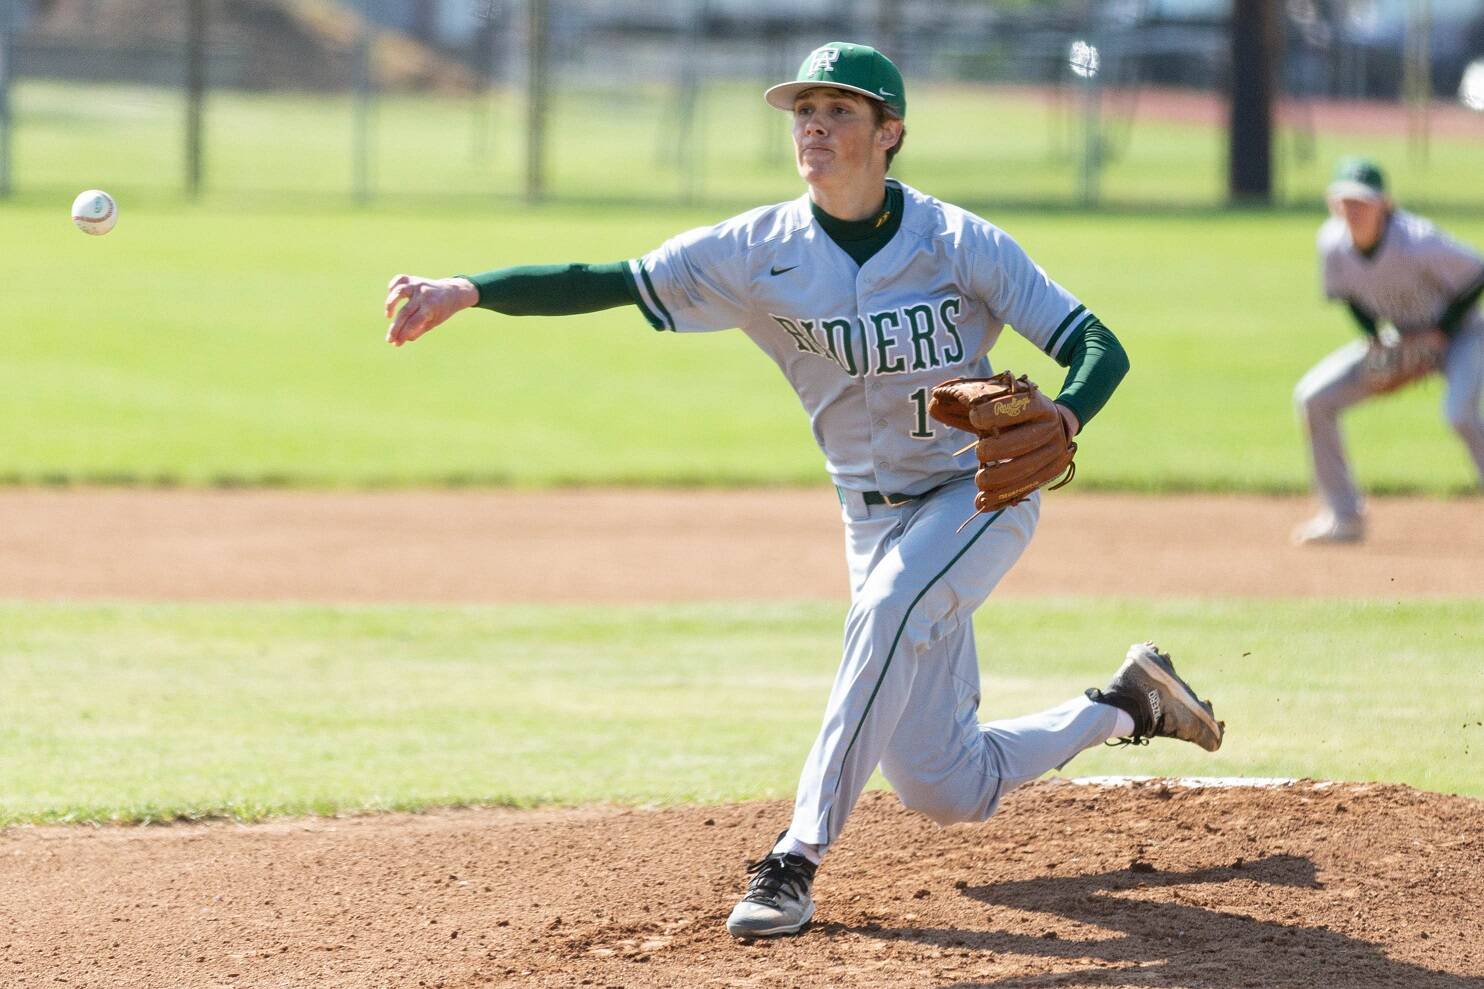 Alec Dietz/The Chronicle
Port Angeles’ Kole Acker releases a pitch against W.F. West in the opening round of state in Chehalis on Saturday.